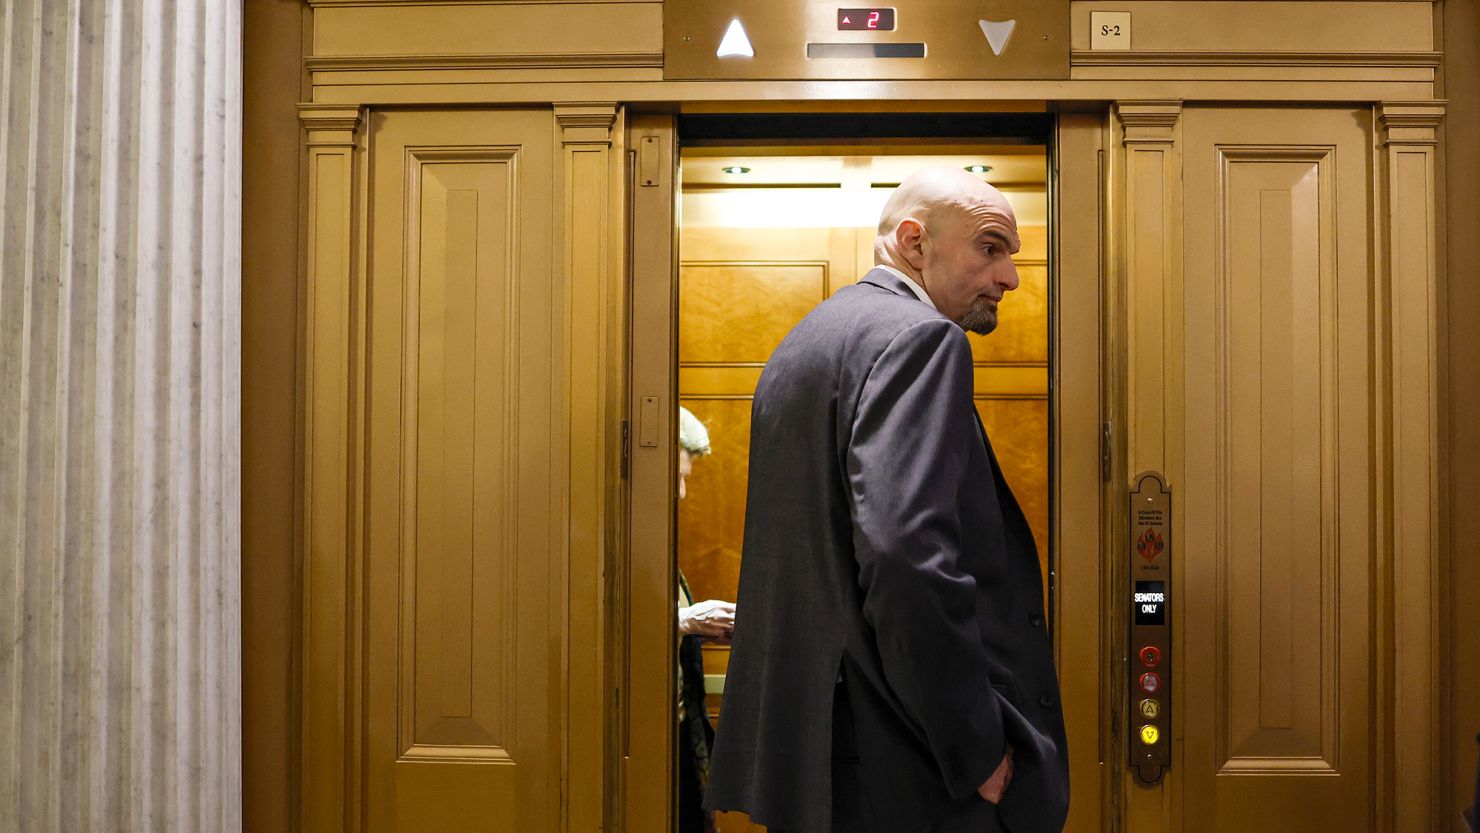 Democratic Sen. John Fetterman of Pennsylvania departs from the Senate Chambers during a series of the votes at the U.S. Capitol Building on February 13, 2023 in Washington, DC.